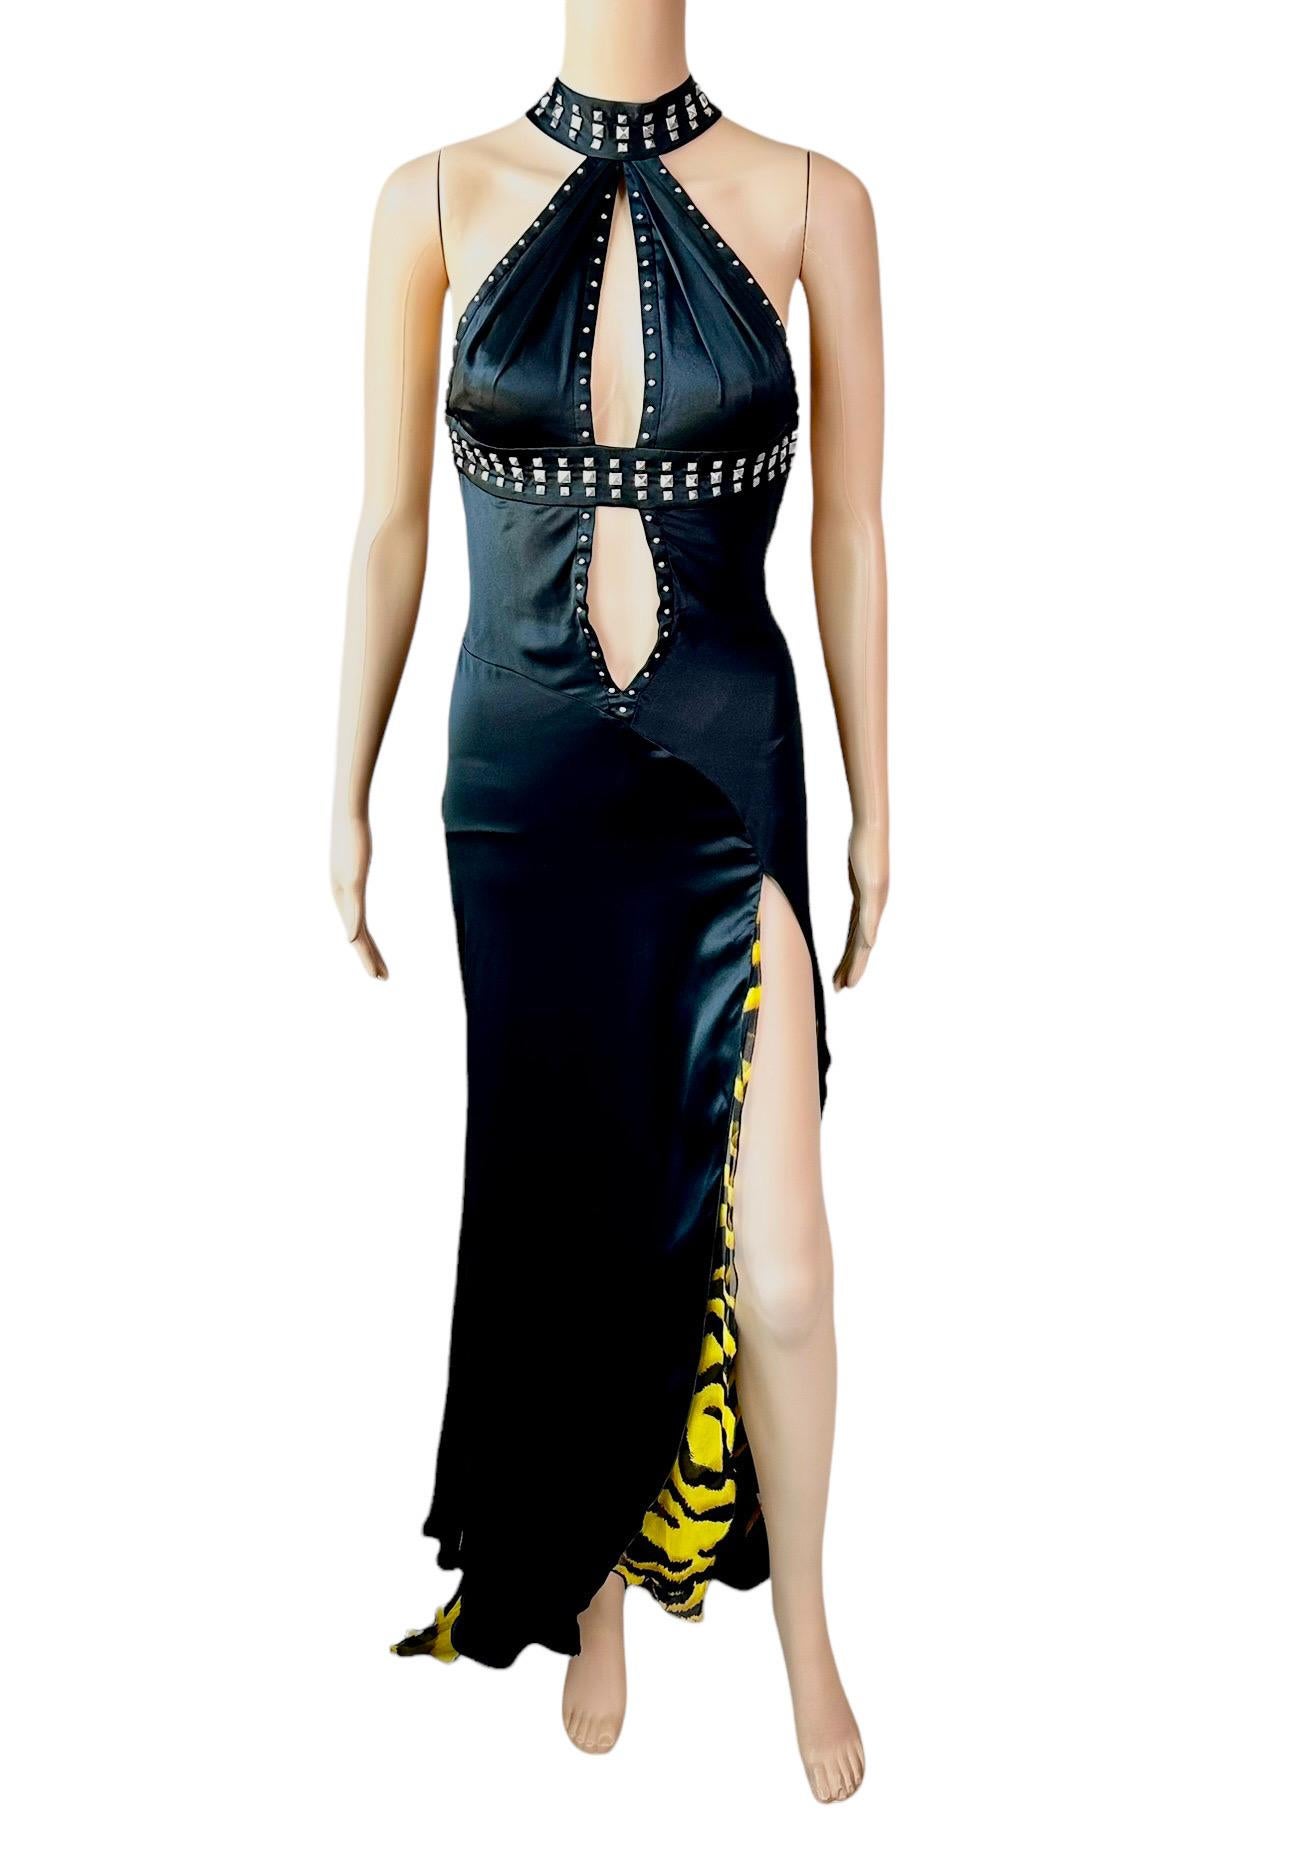 Versace F/W 2004 Runway Studded Plunging Keyhole Neckline Evening Dress Gown For Sale 1